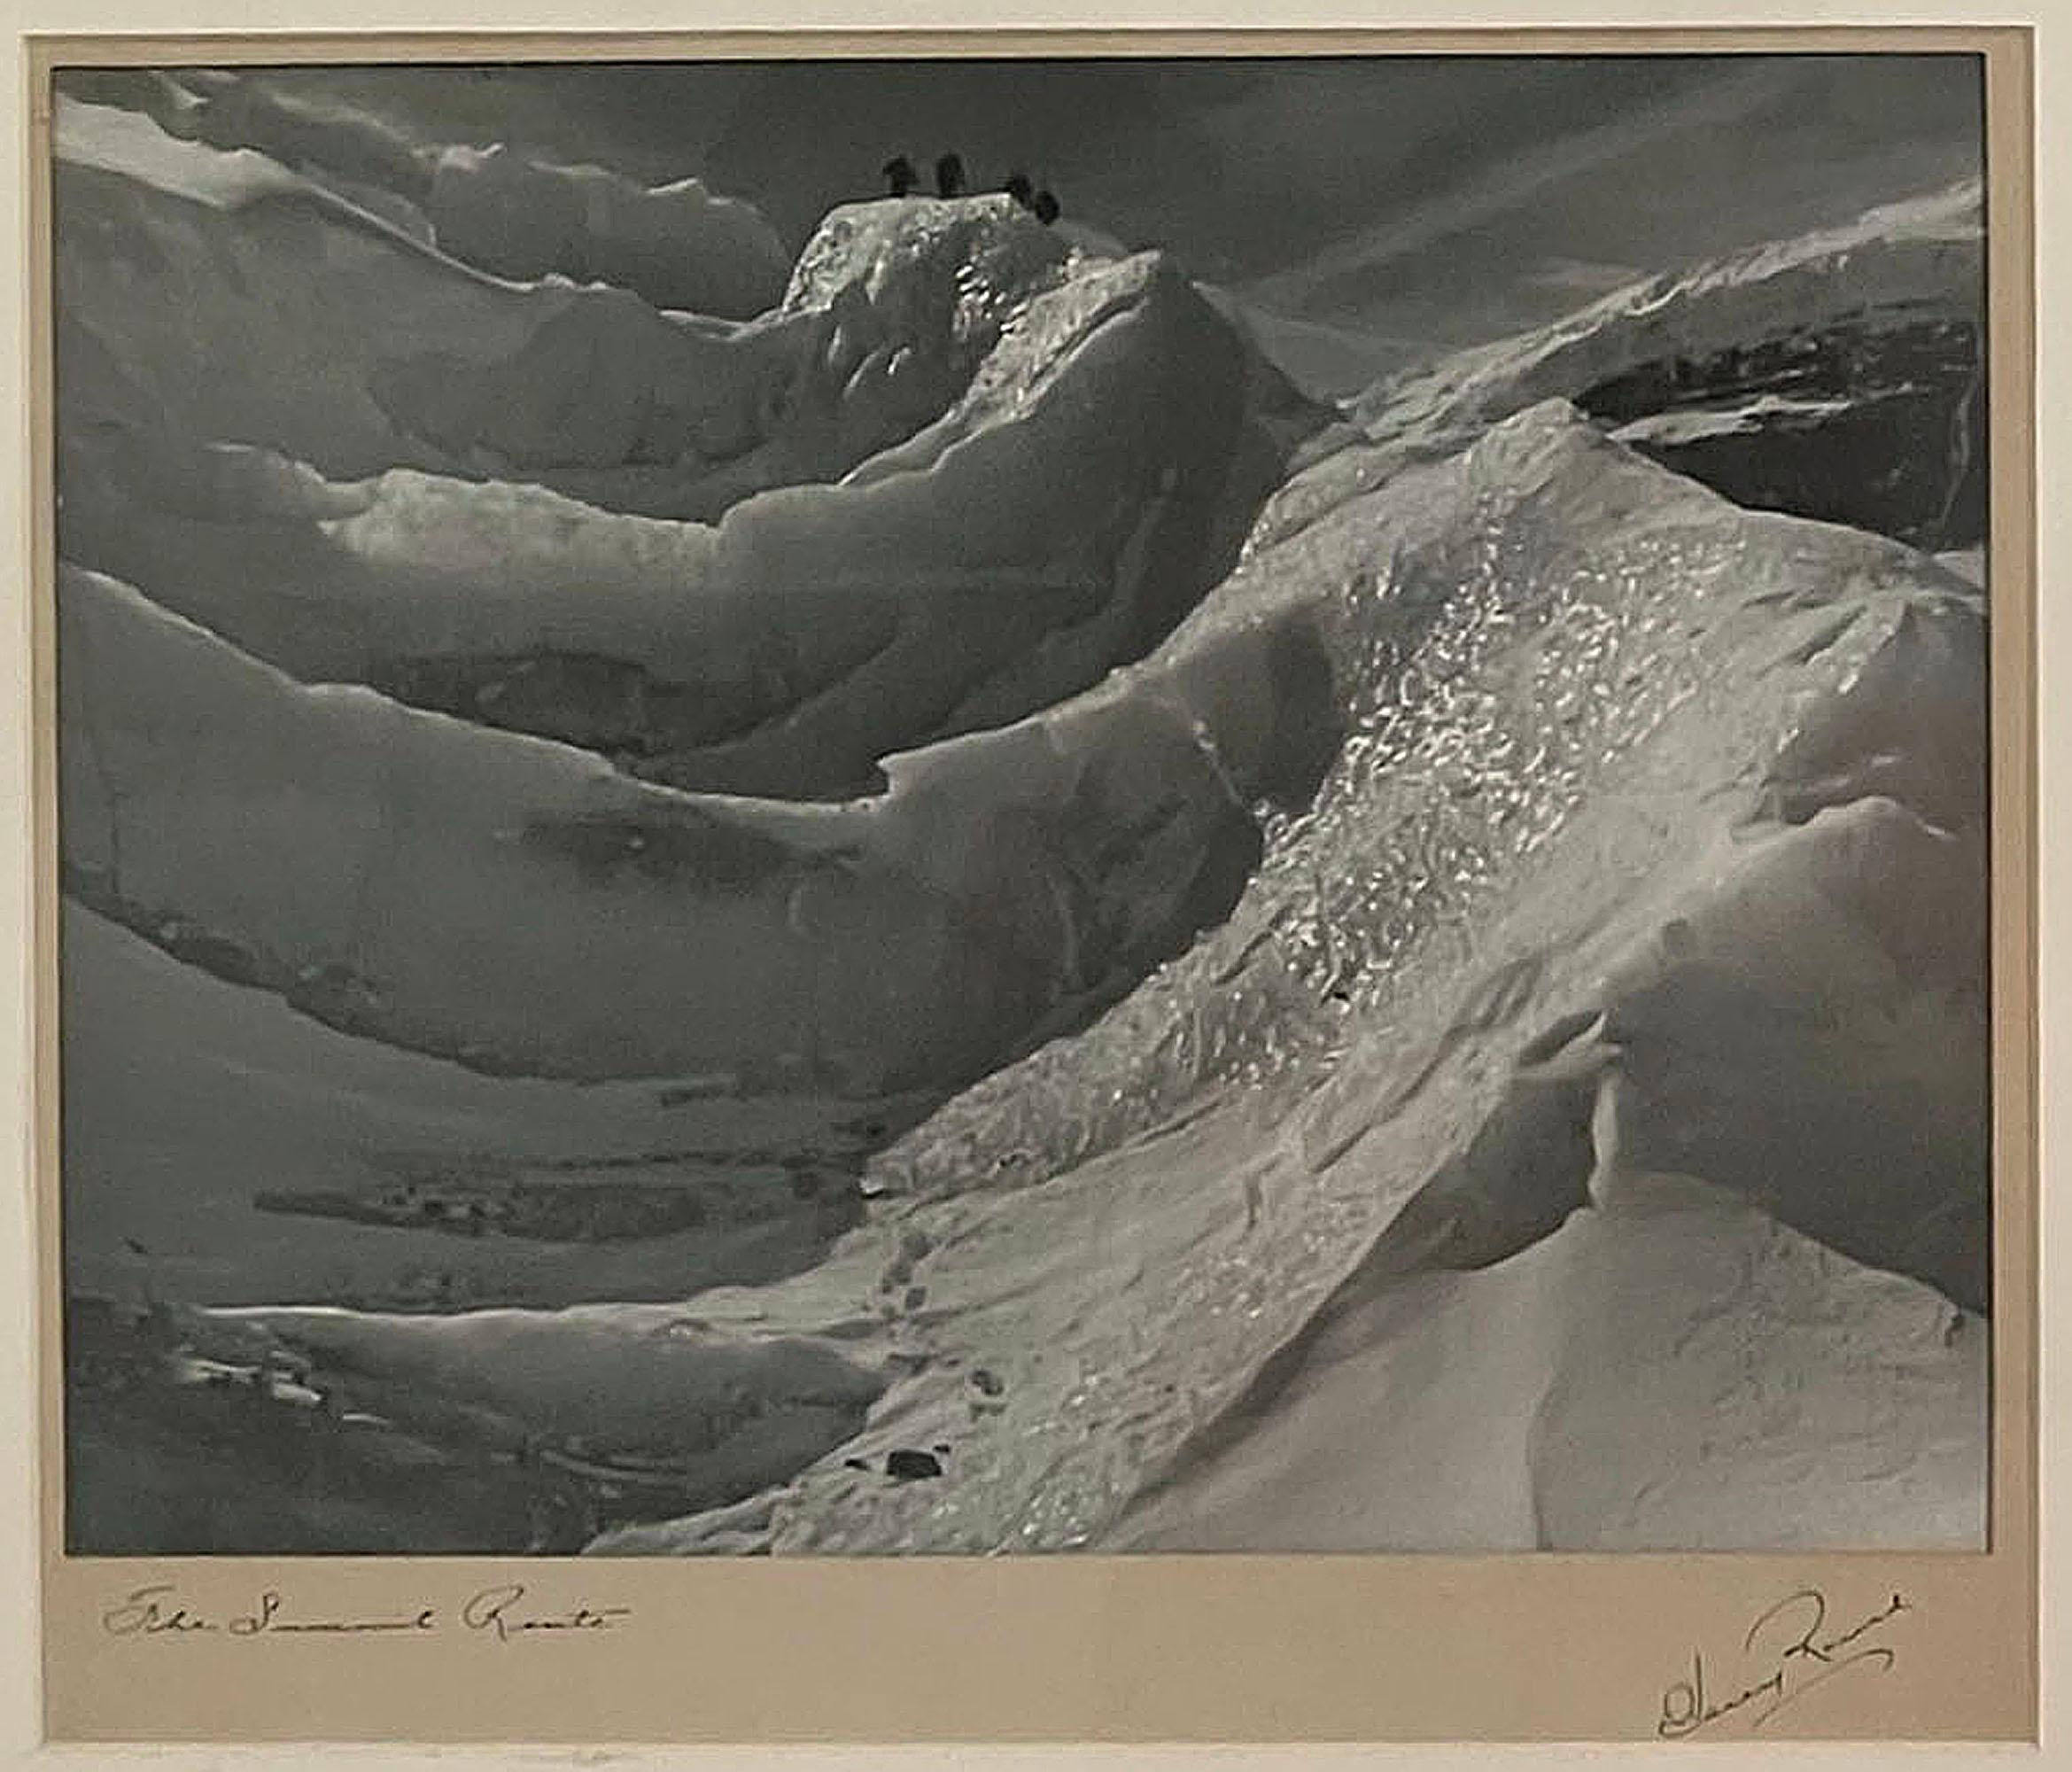 An original signed silver gelatin print entitled “The Summit Route” photographed in the northern Rockies by the important Canadian photojournalist Harry Rowed, ca. 1930-40s. Rowed gained recognition after being chosen to cover the infamous 1936